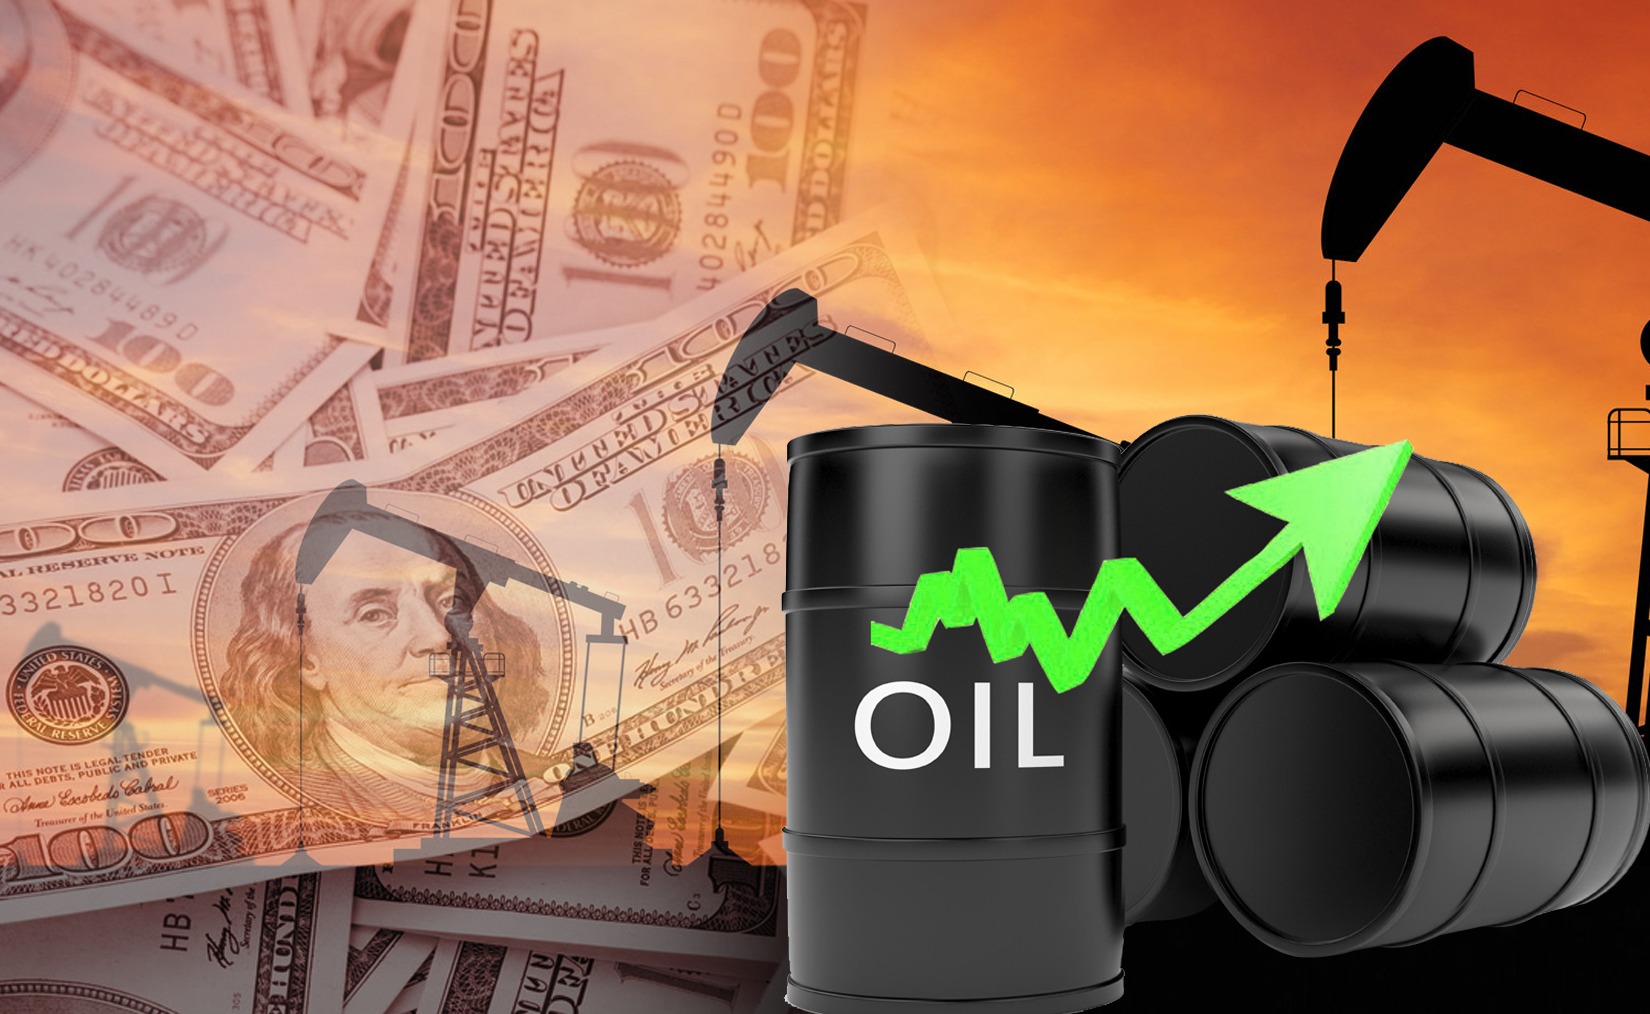 Kuwait oil price up 6 ents to USD 65.47 pb                                                                                                                                                                                                                